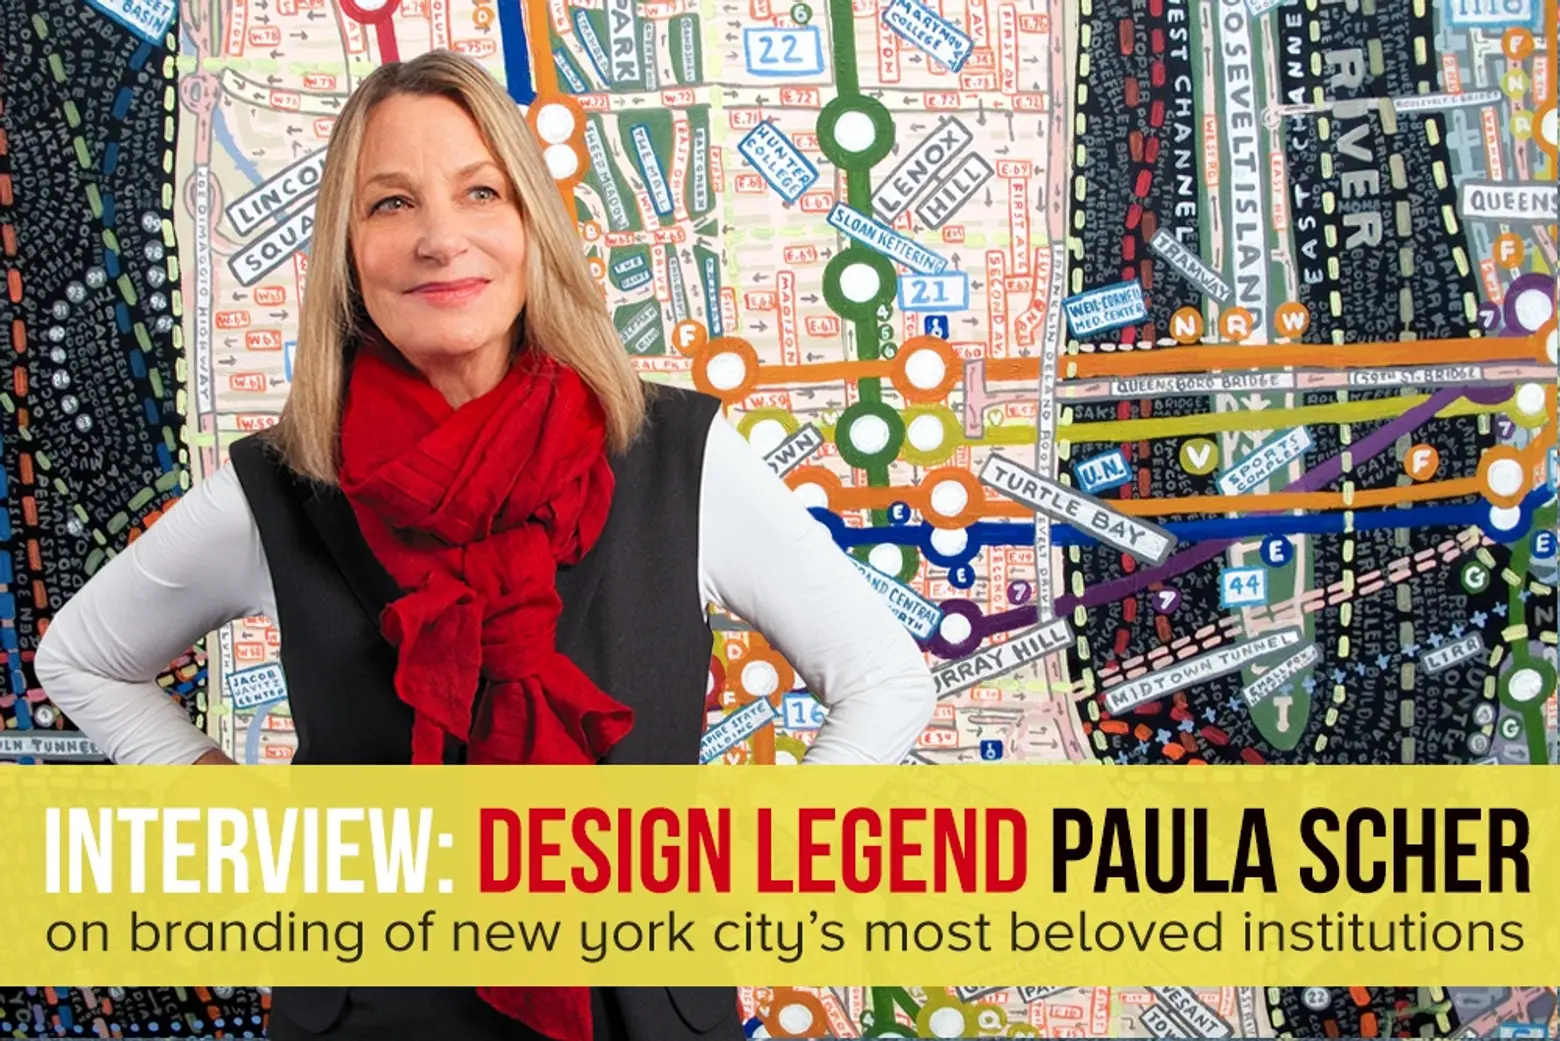 INTERVIEW: Paula Scher on designing the brands of New York’s most beloved institutions